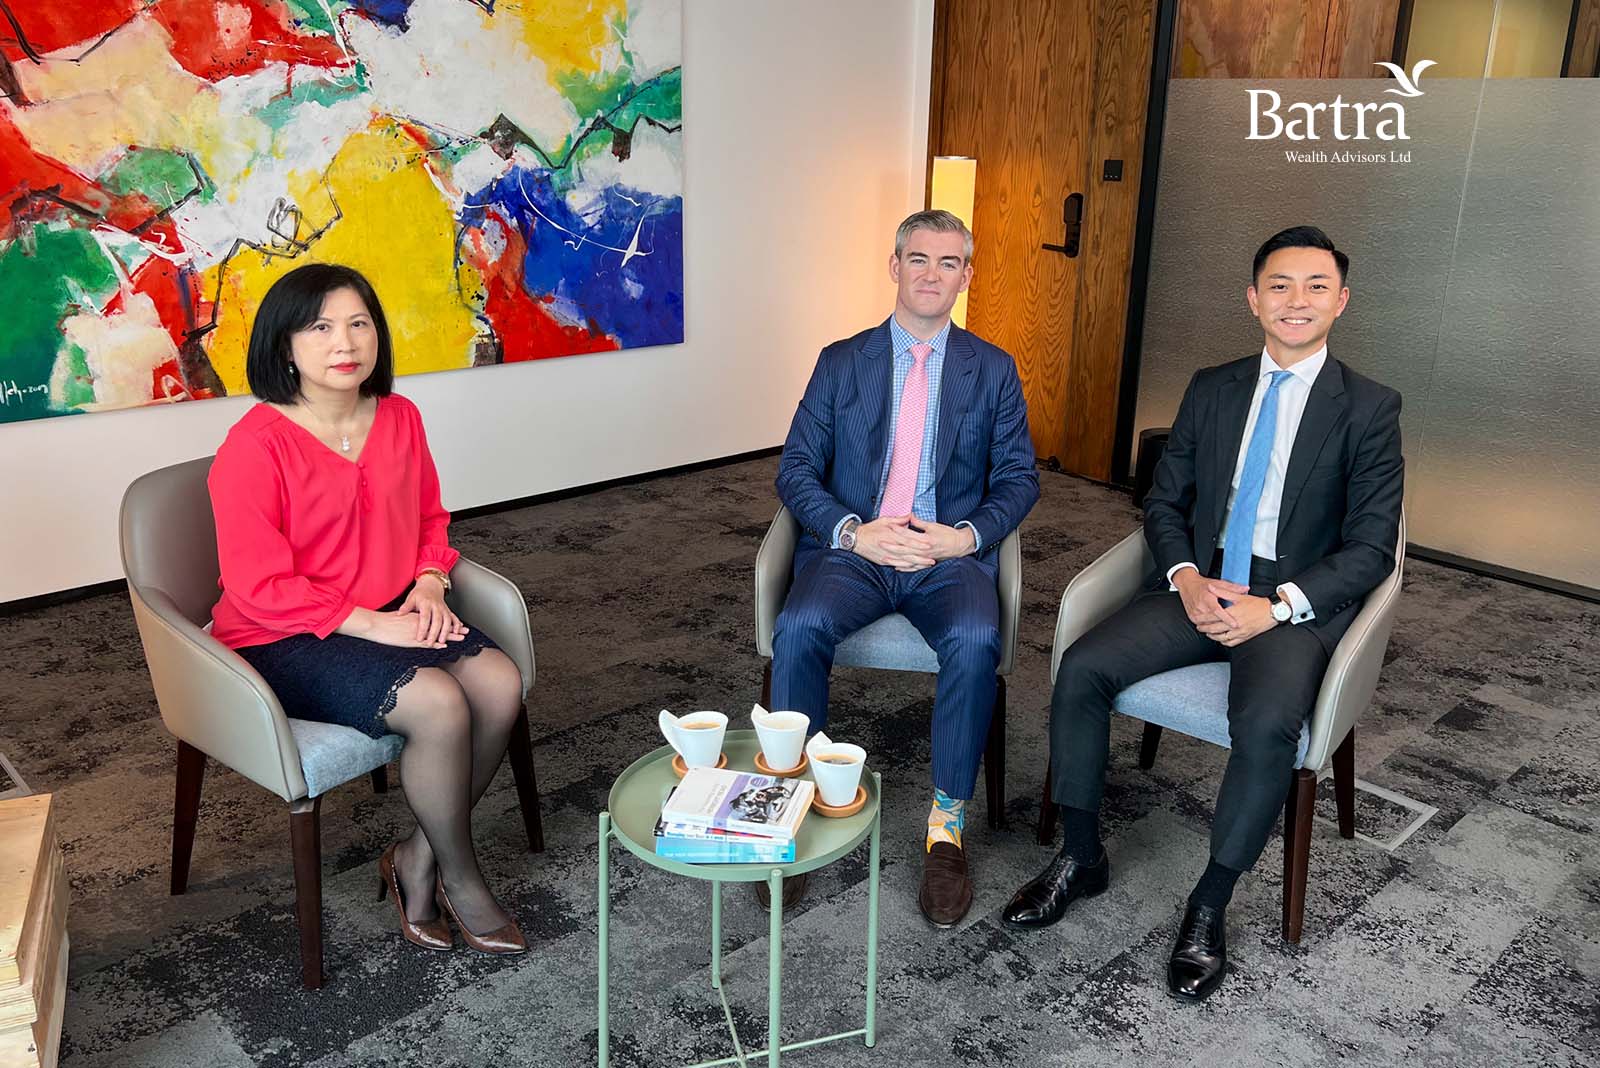 Why Ireland and why invest in the IIP? A fireside chat with Bartra CEO and valued client Sally Yeh